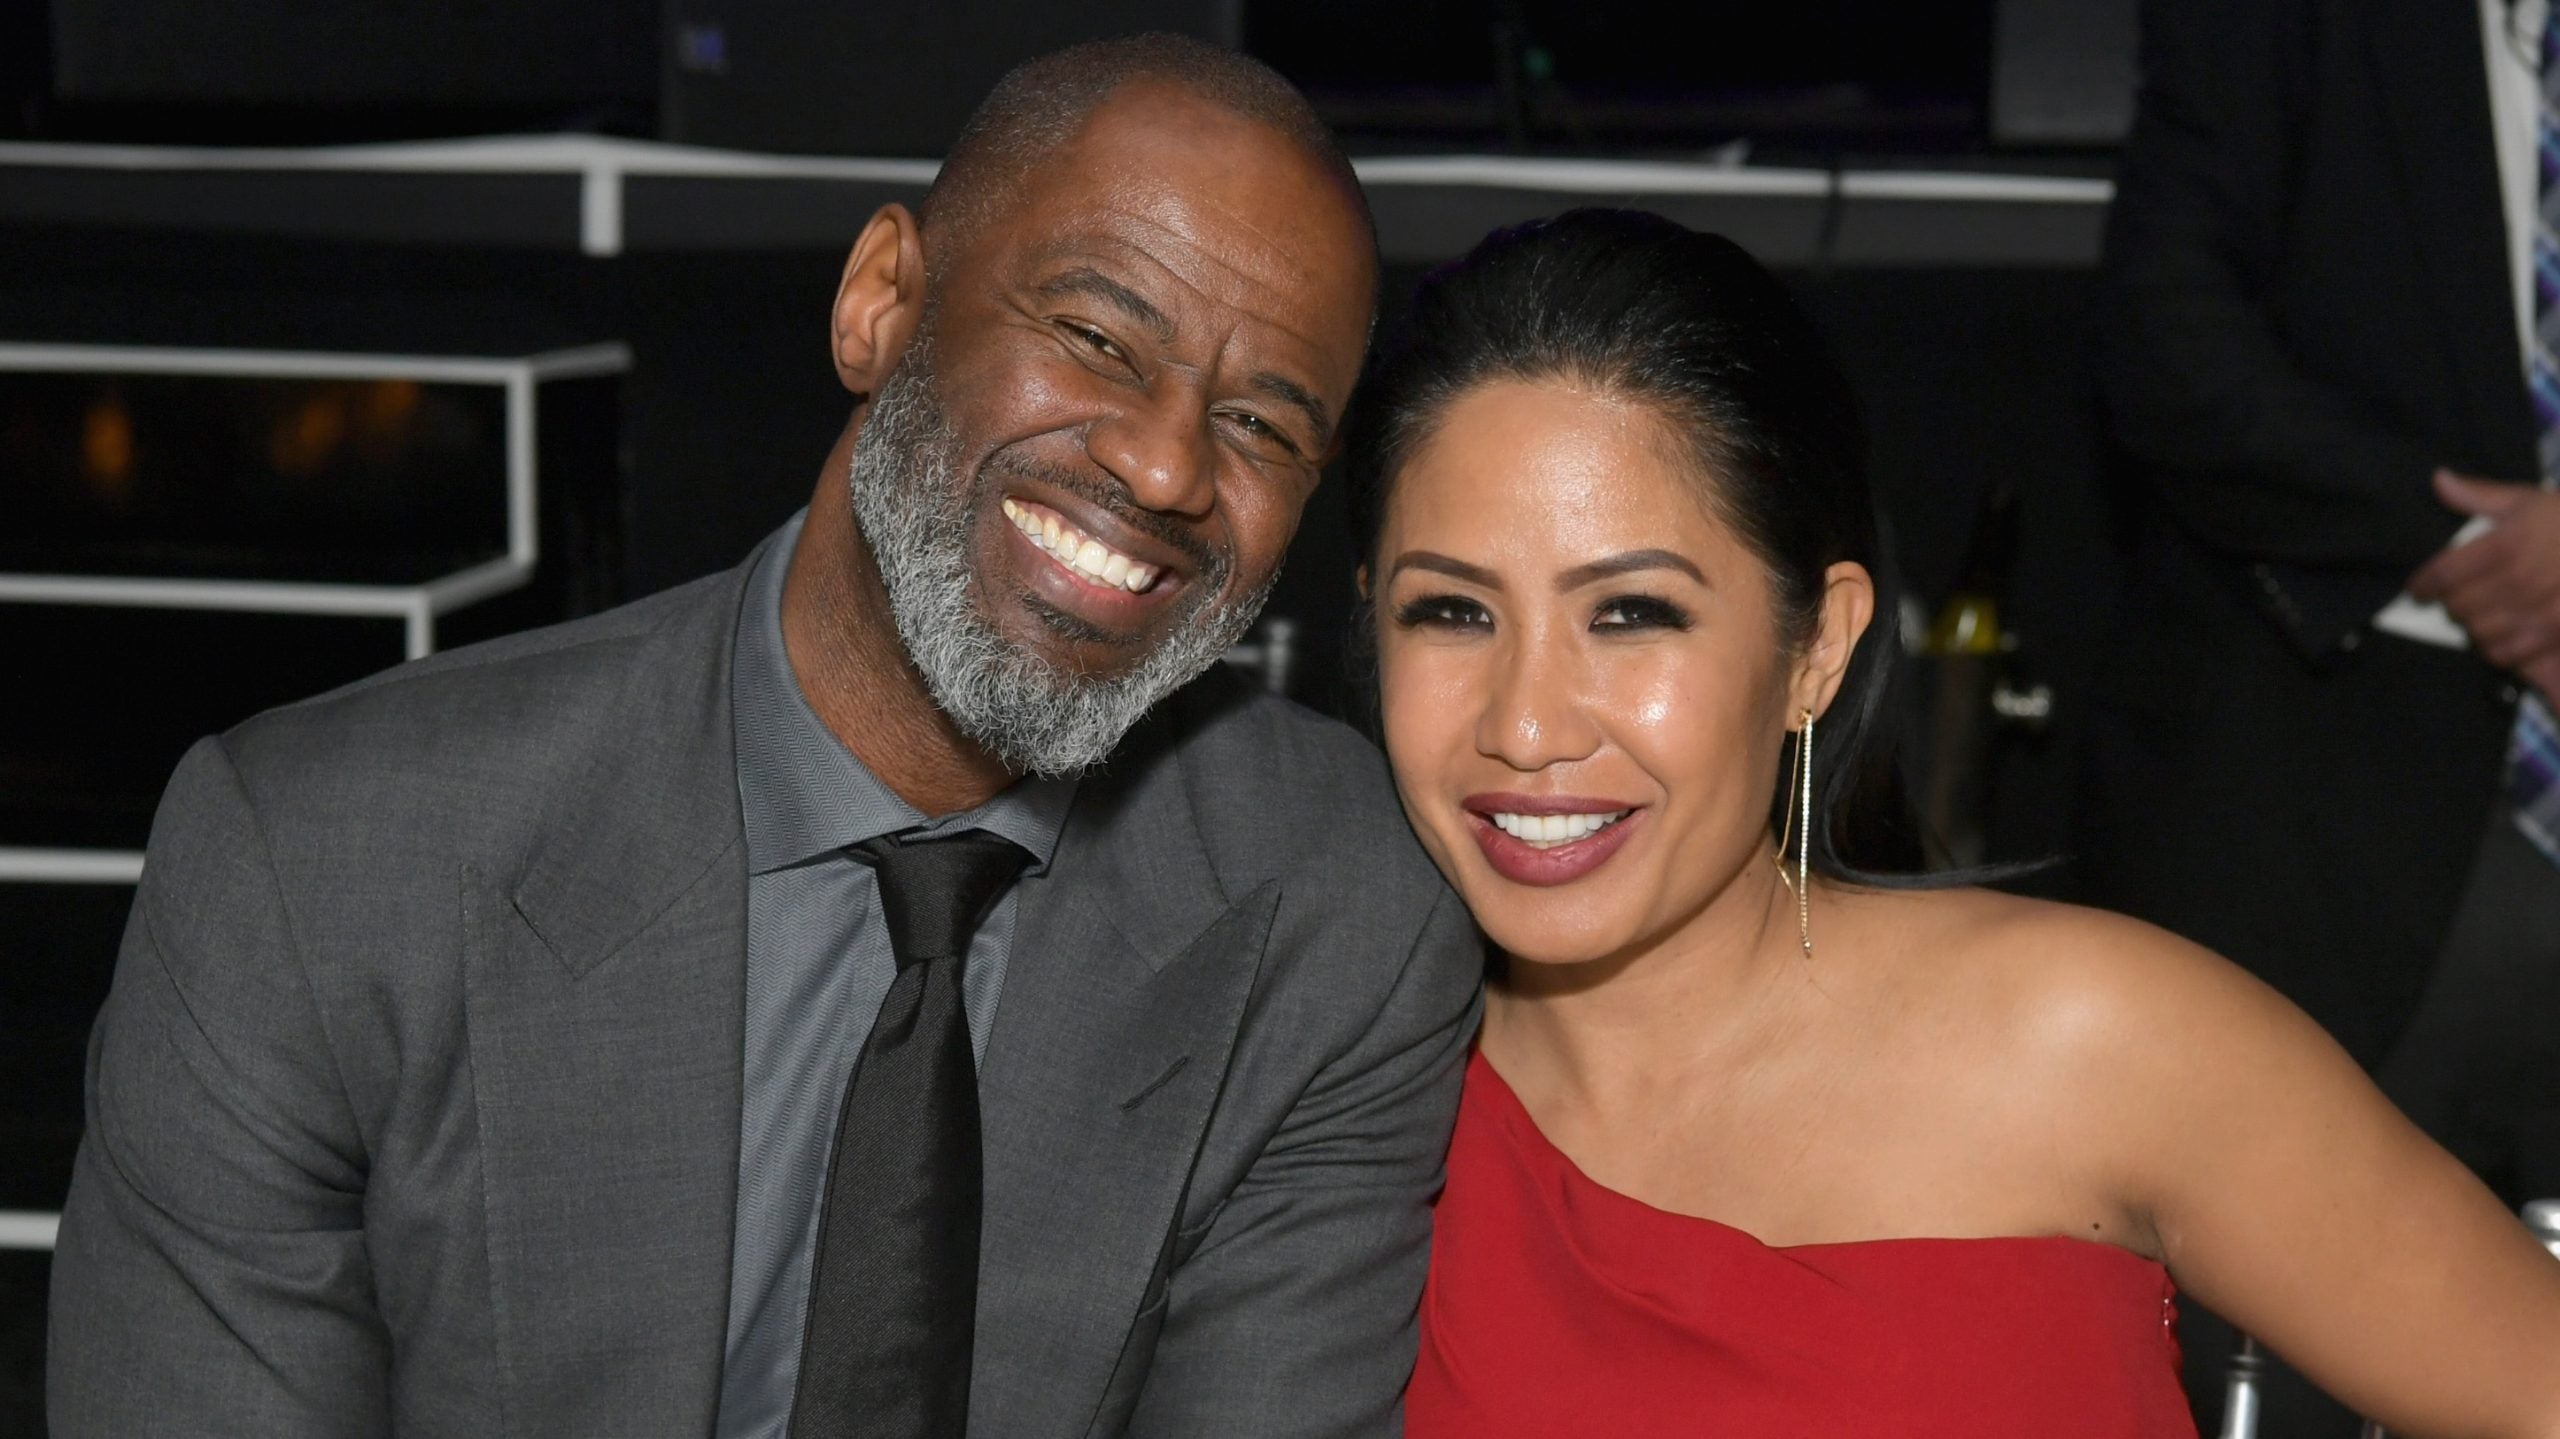 Brian McKnight And His Wife Are Expecting! ‘We Are Ecstatic’